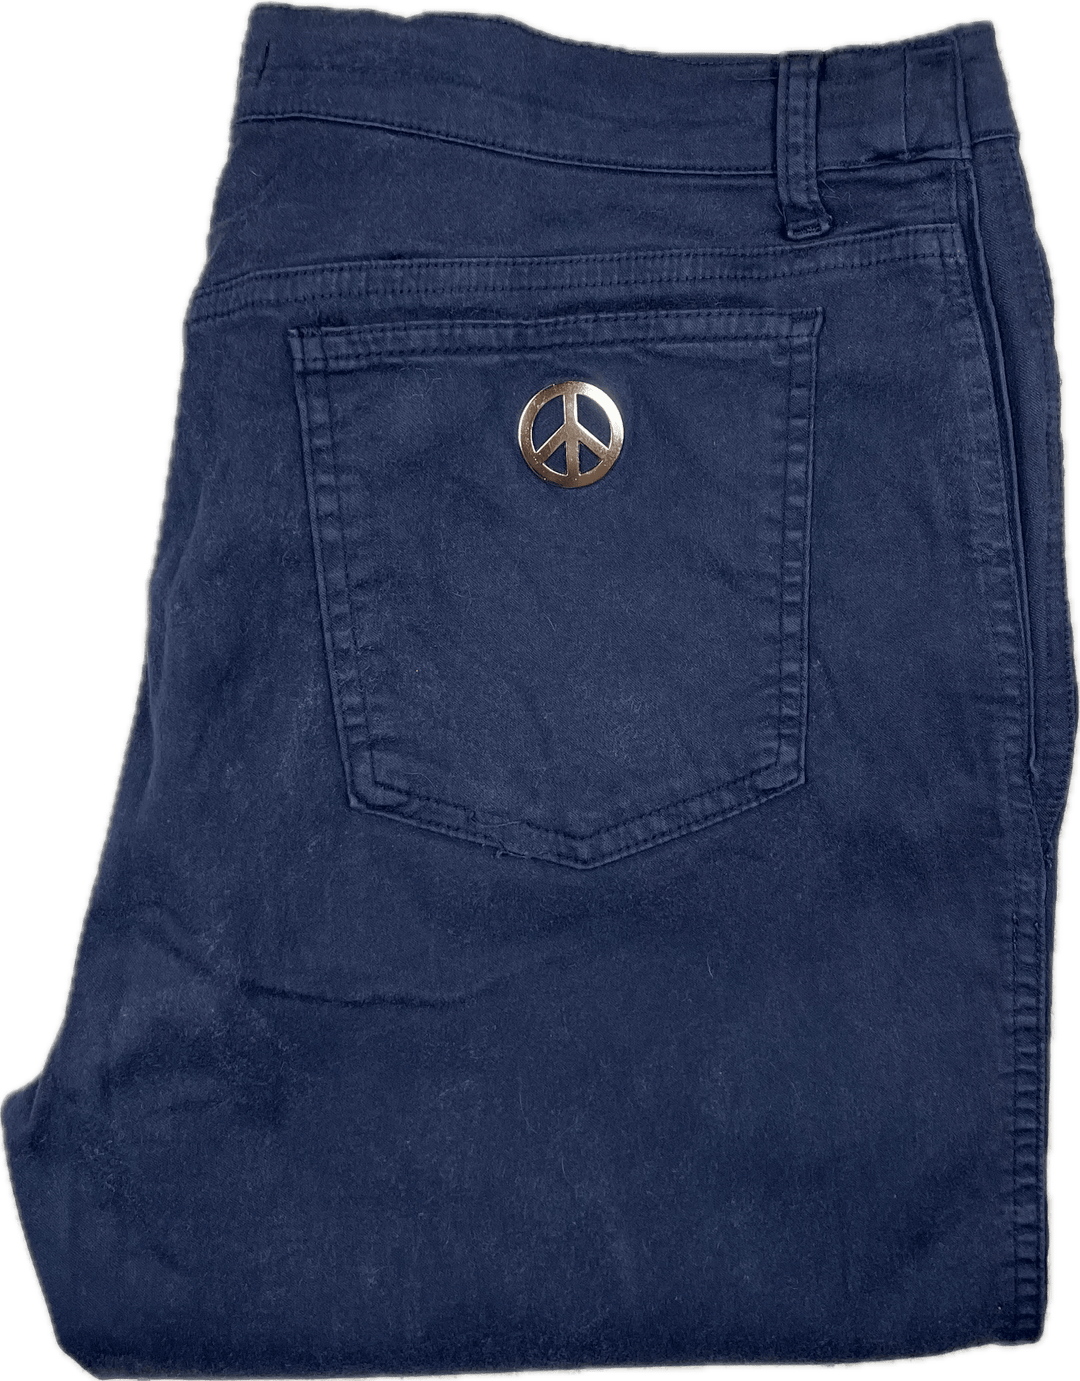 Moschino Italian Made Navy Straight Fit Jeans- Size 14 - Jean Pool